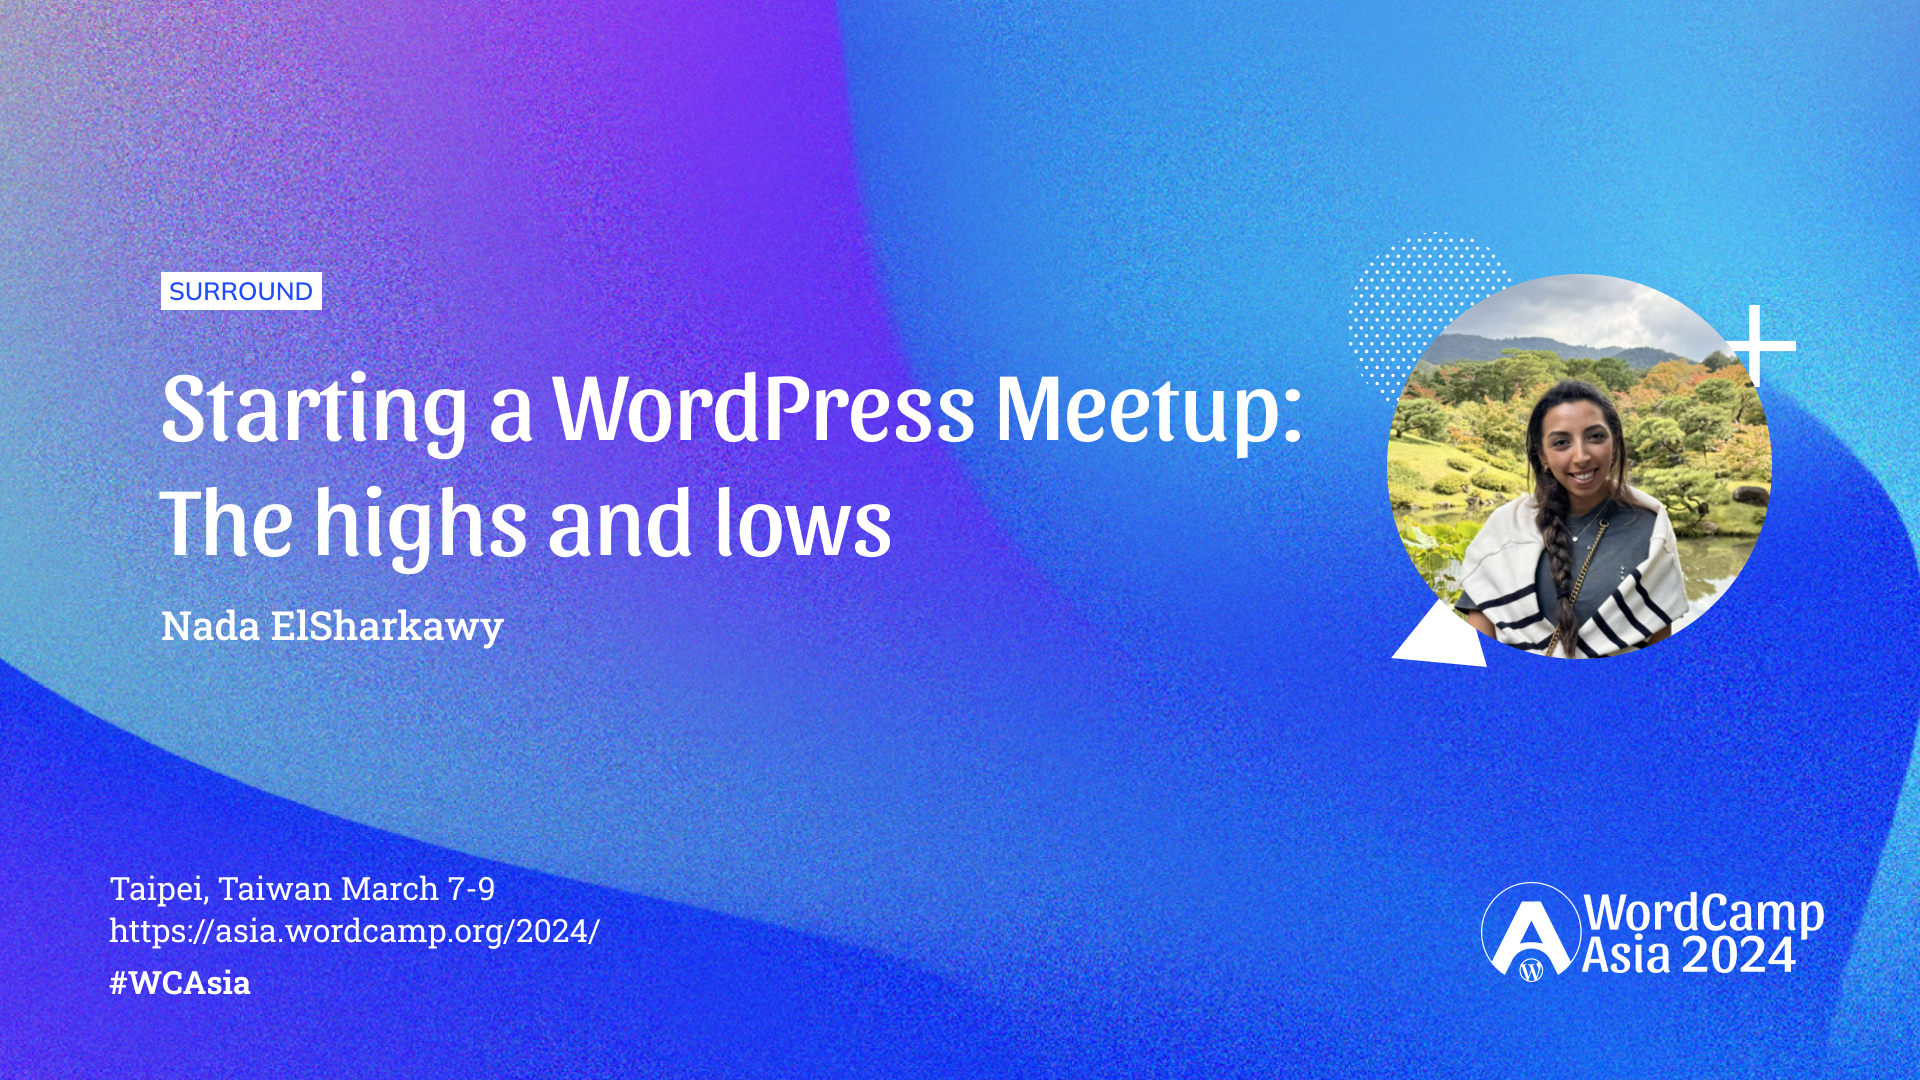 Starting a WordPress Meetup: The highs and lows